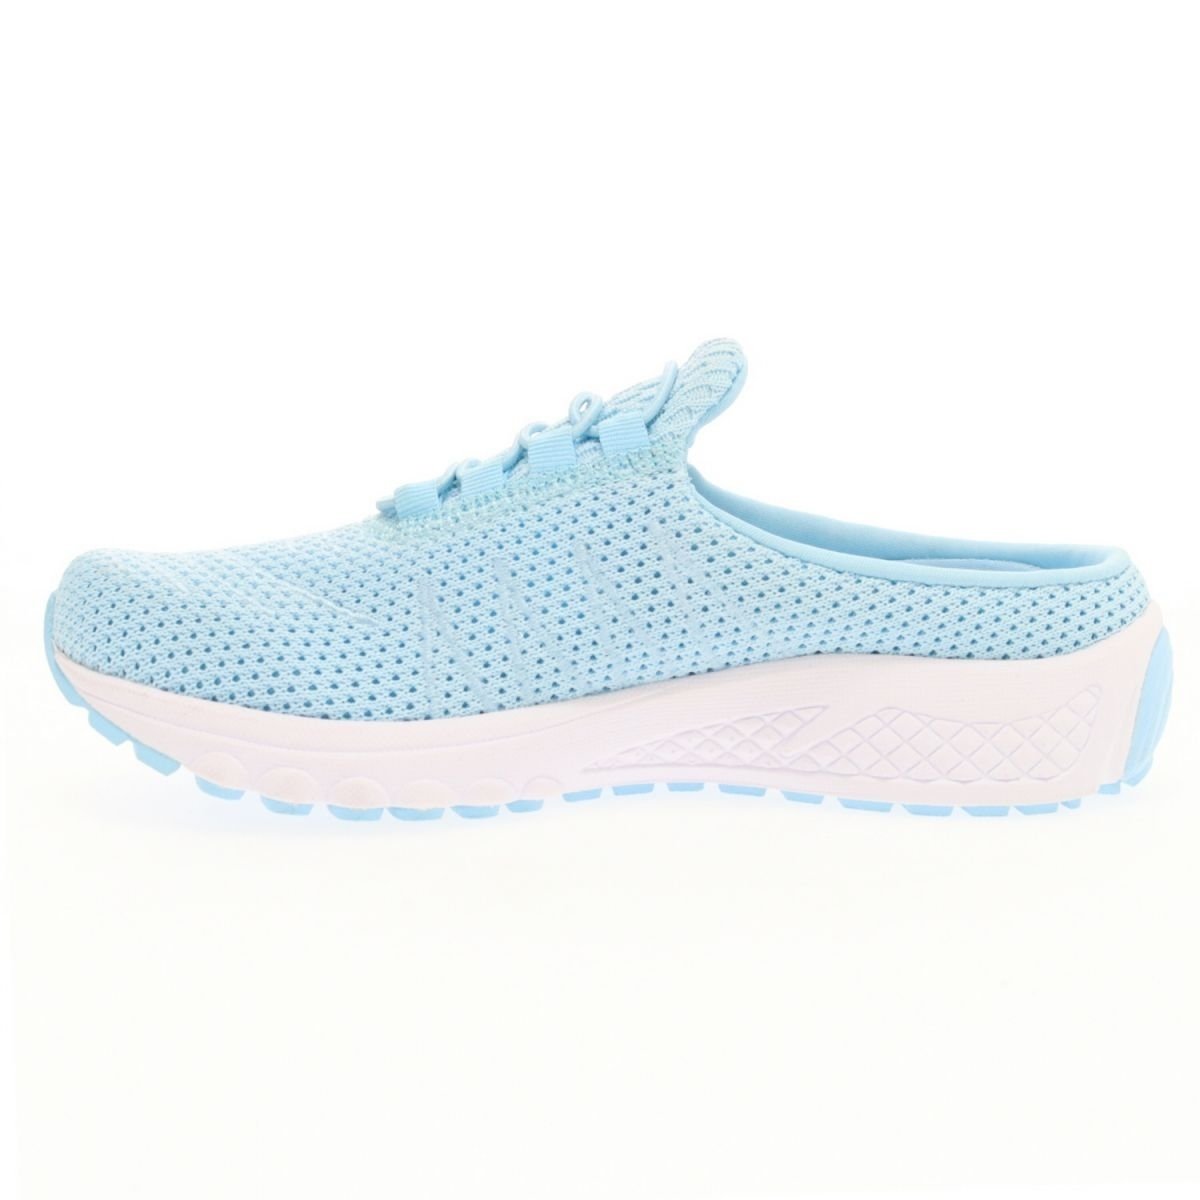 Propet Women's Tour Knit Slide Baby Blue - WAO001MBBL BABY BLUE - BABY BLUE, 10-N